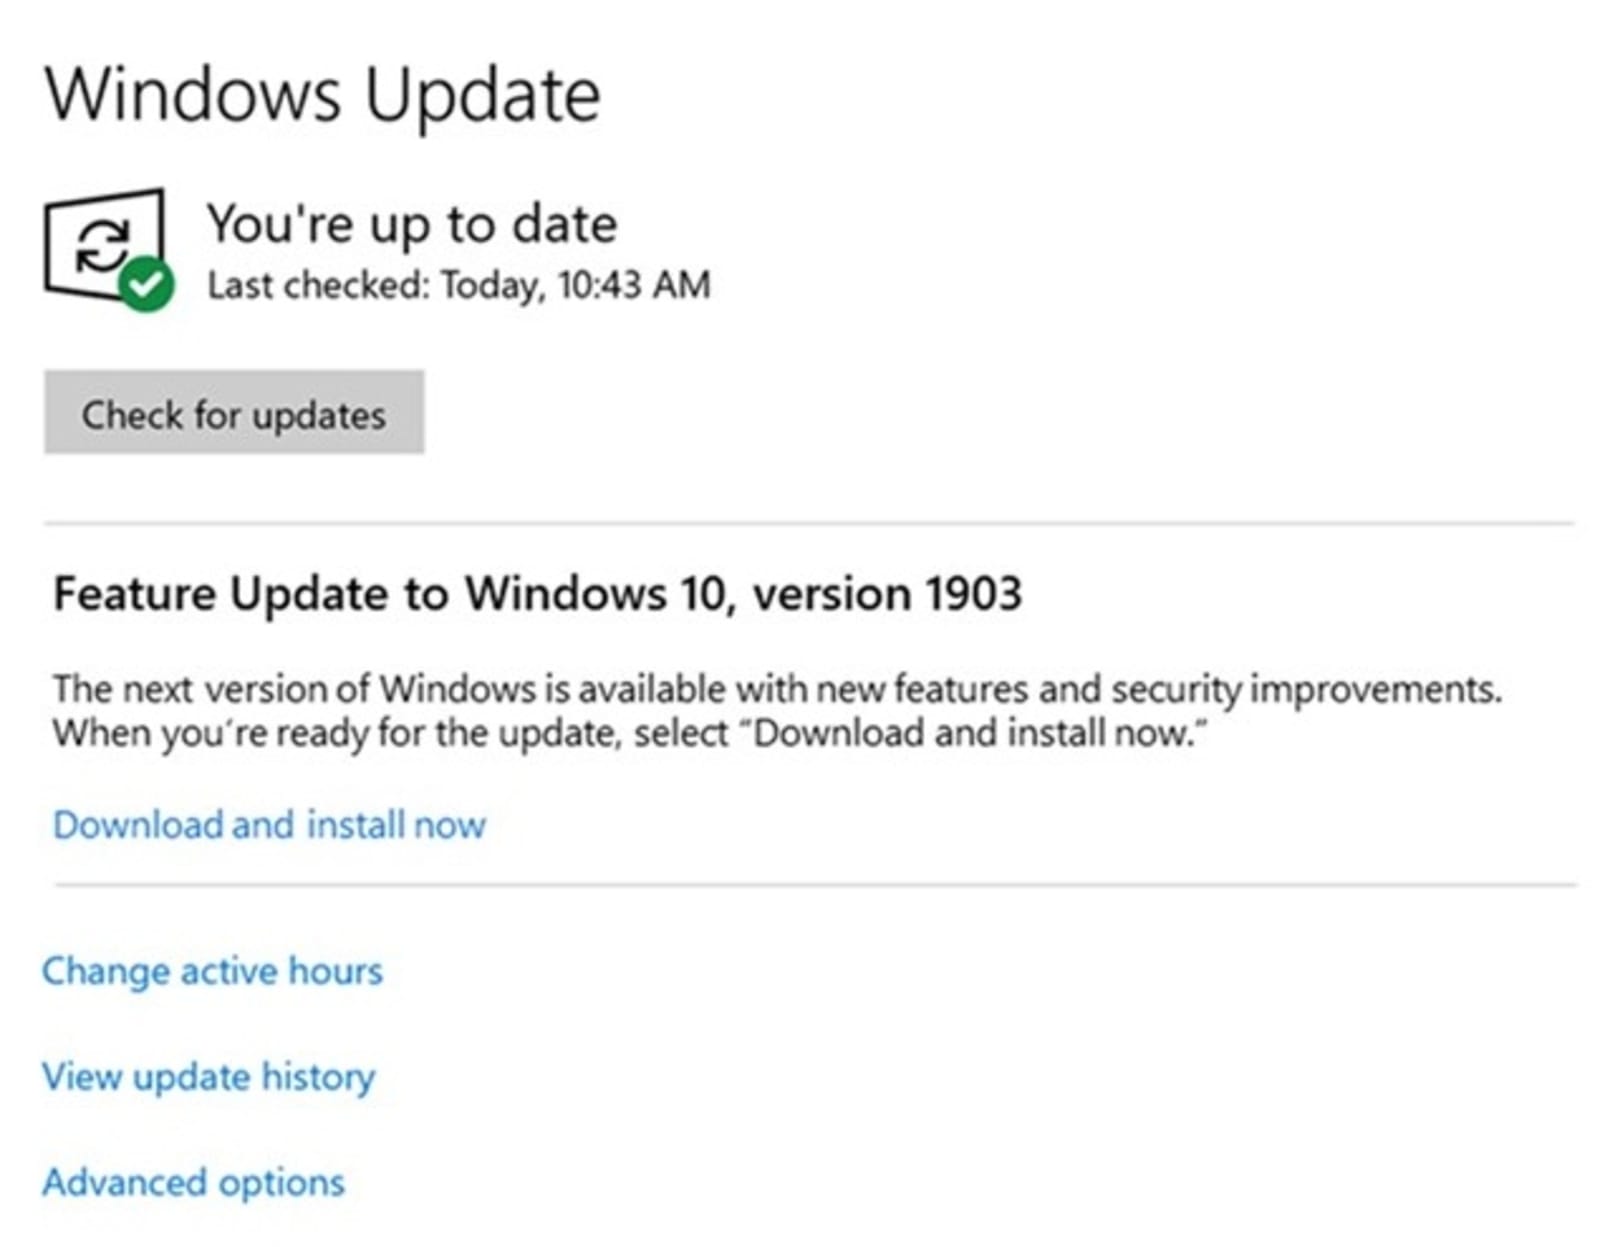 Windows 10 download and install now feature